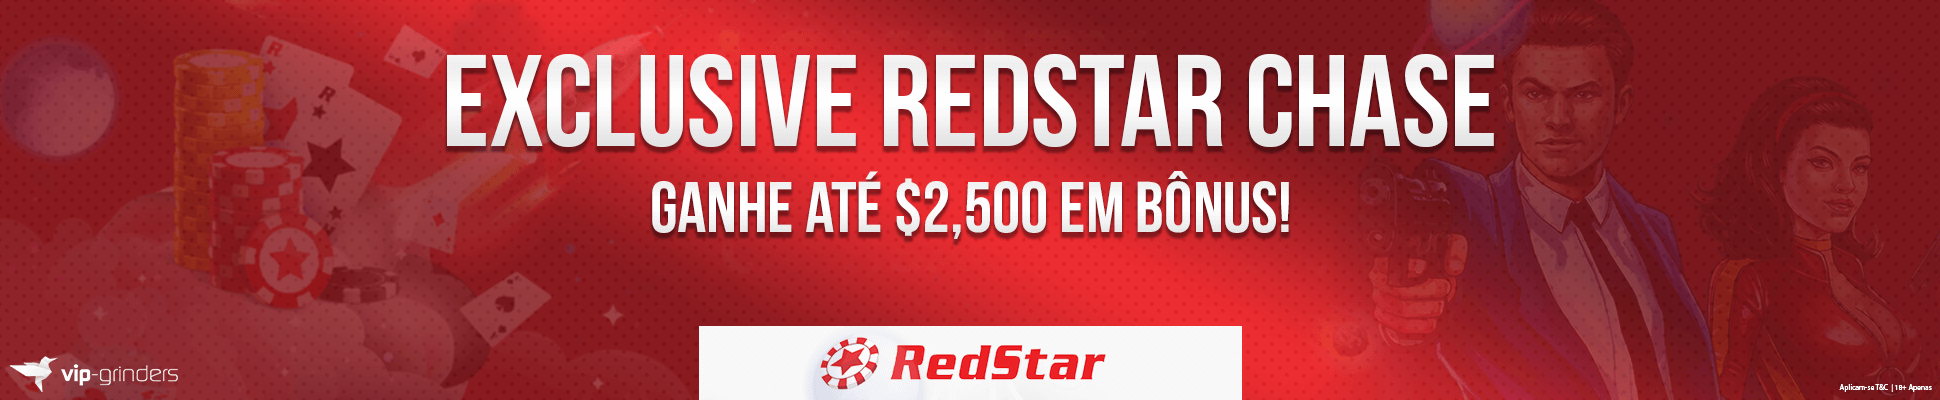 exclusive-redstar-chase-BR